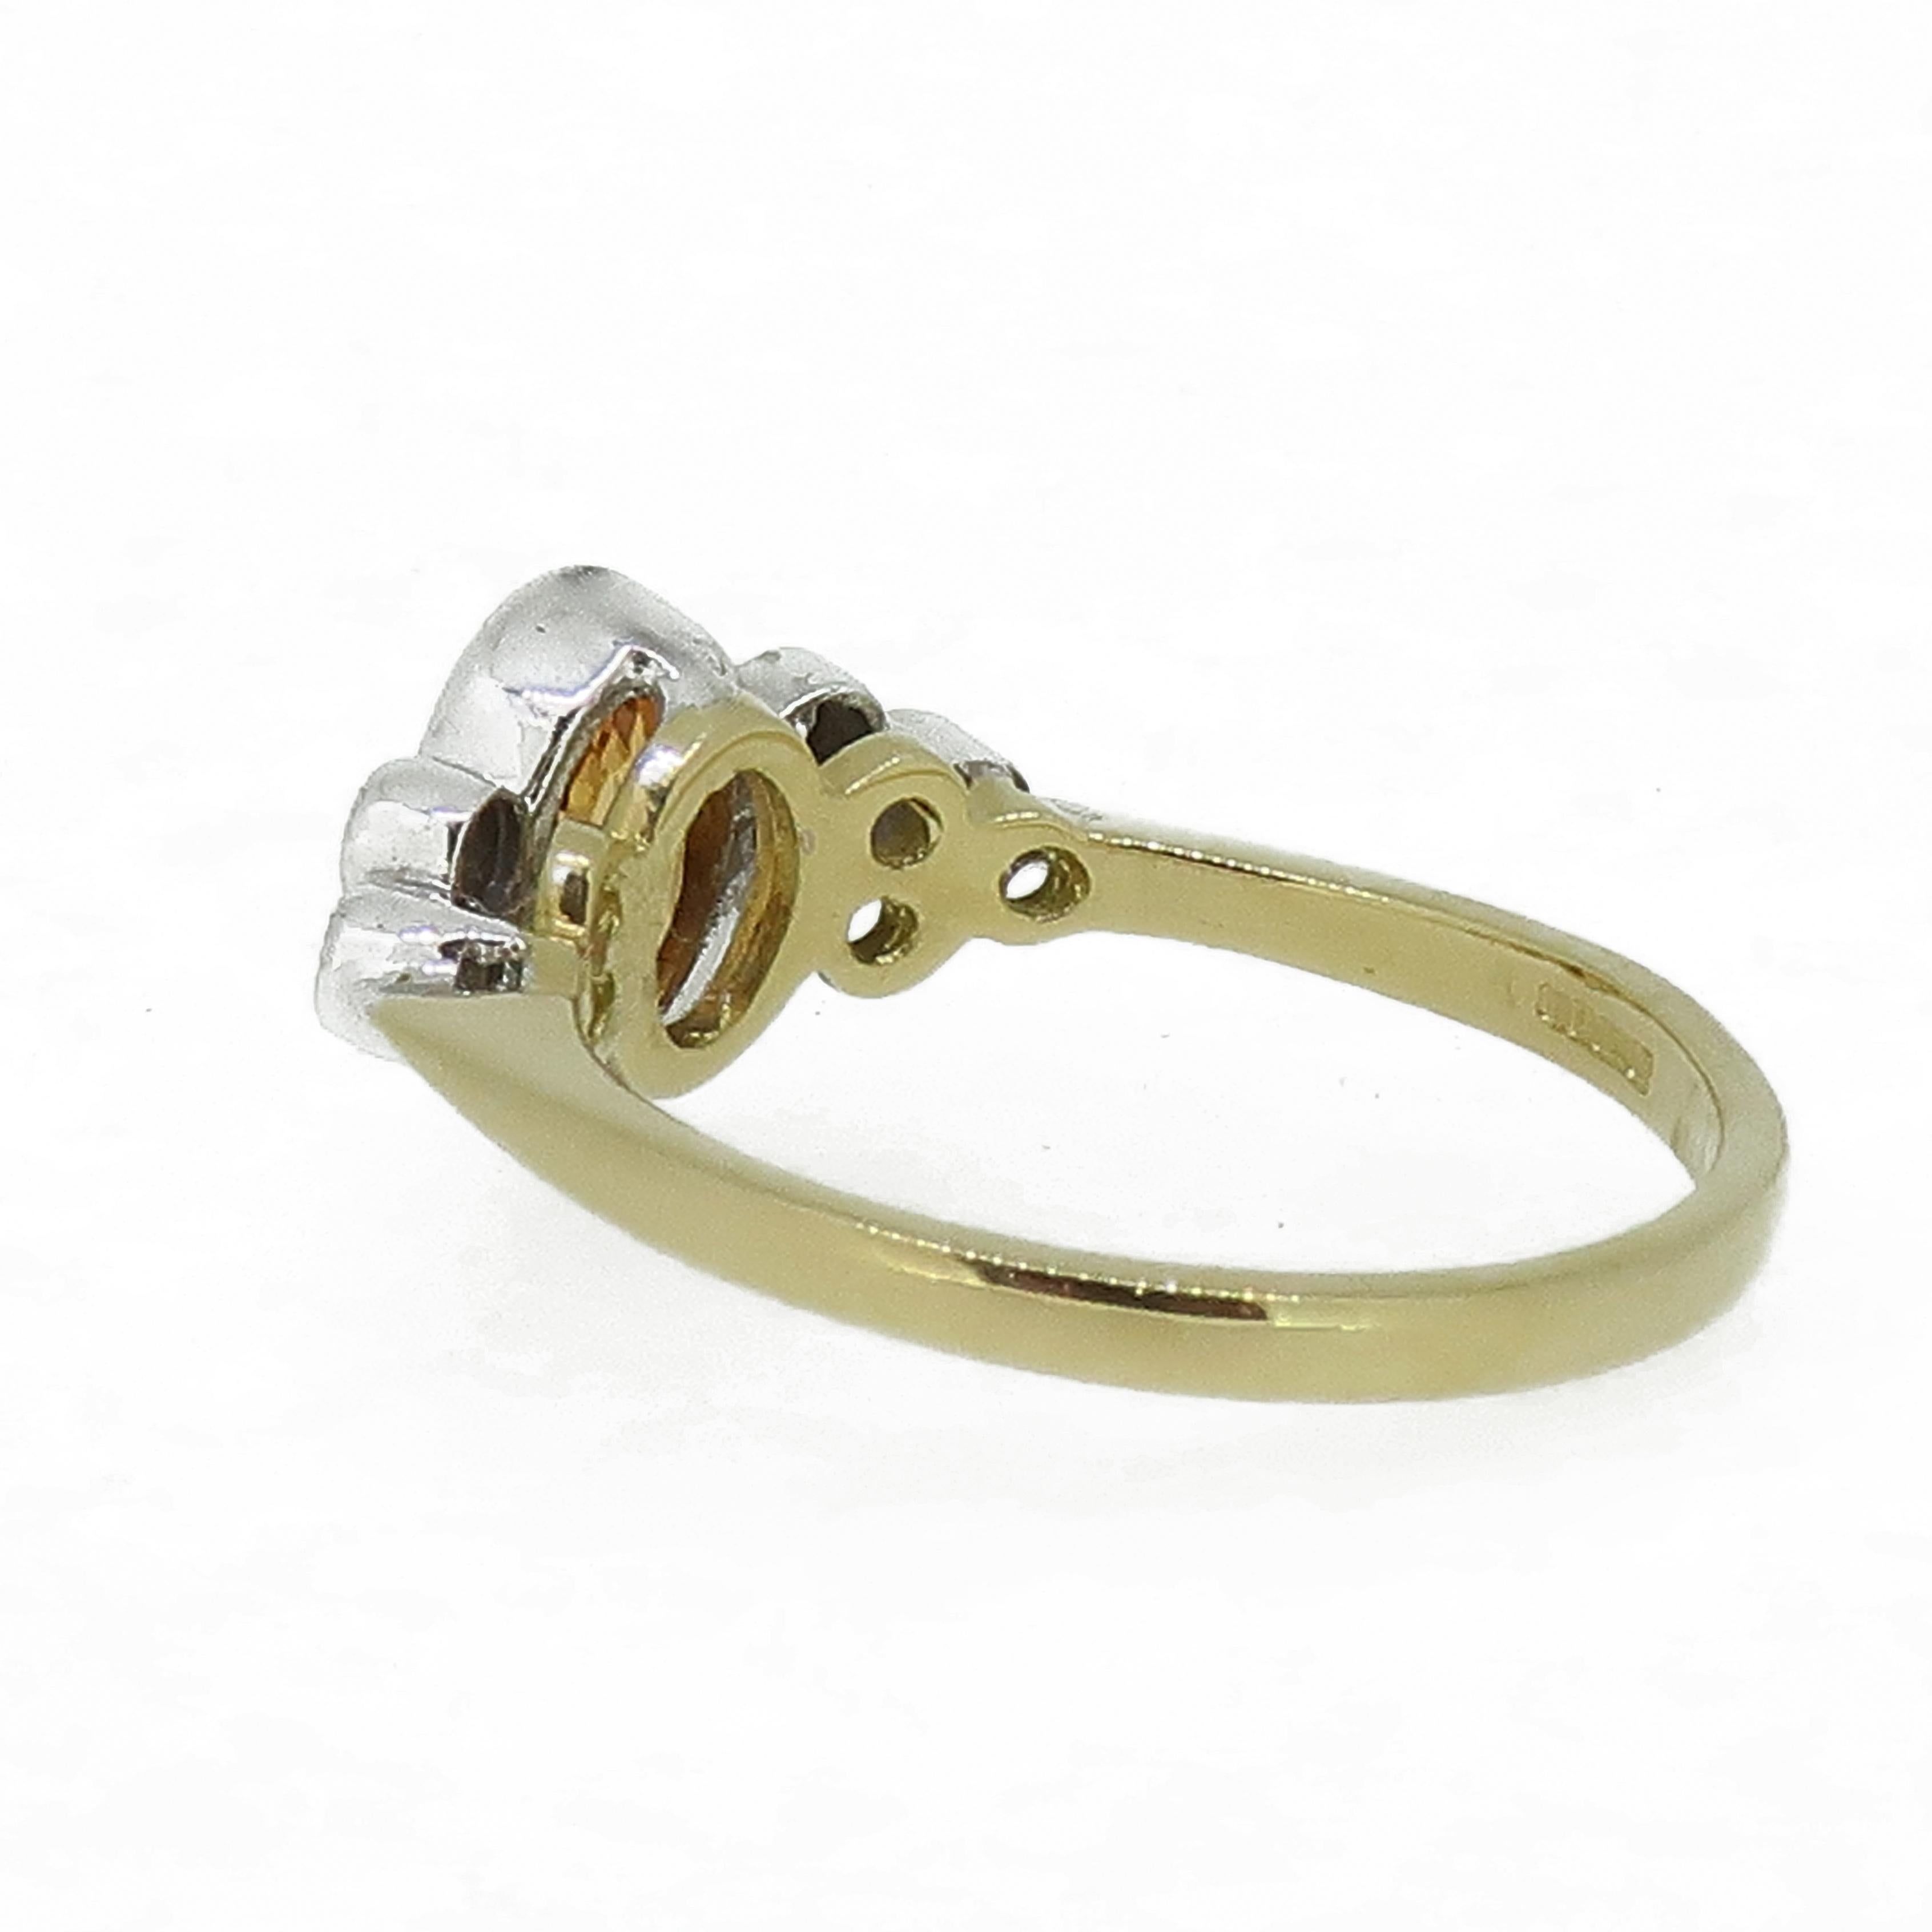 18 Karat Yellow & White Gold Oval Yellow Sapphire and Diamond Ring

A dazzling and dainty yellow sapphire and diamond ring. The central oval yellow sapphire is a lovely bright colour encased in a 18ct white gold rub over setting, with a trefoil of